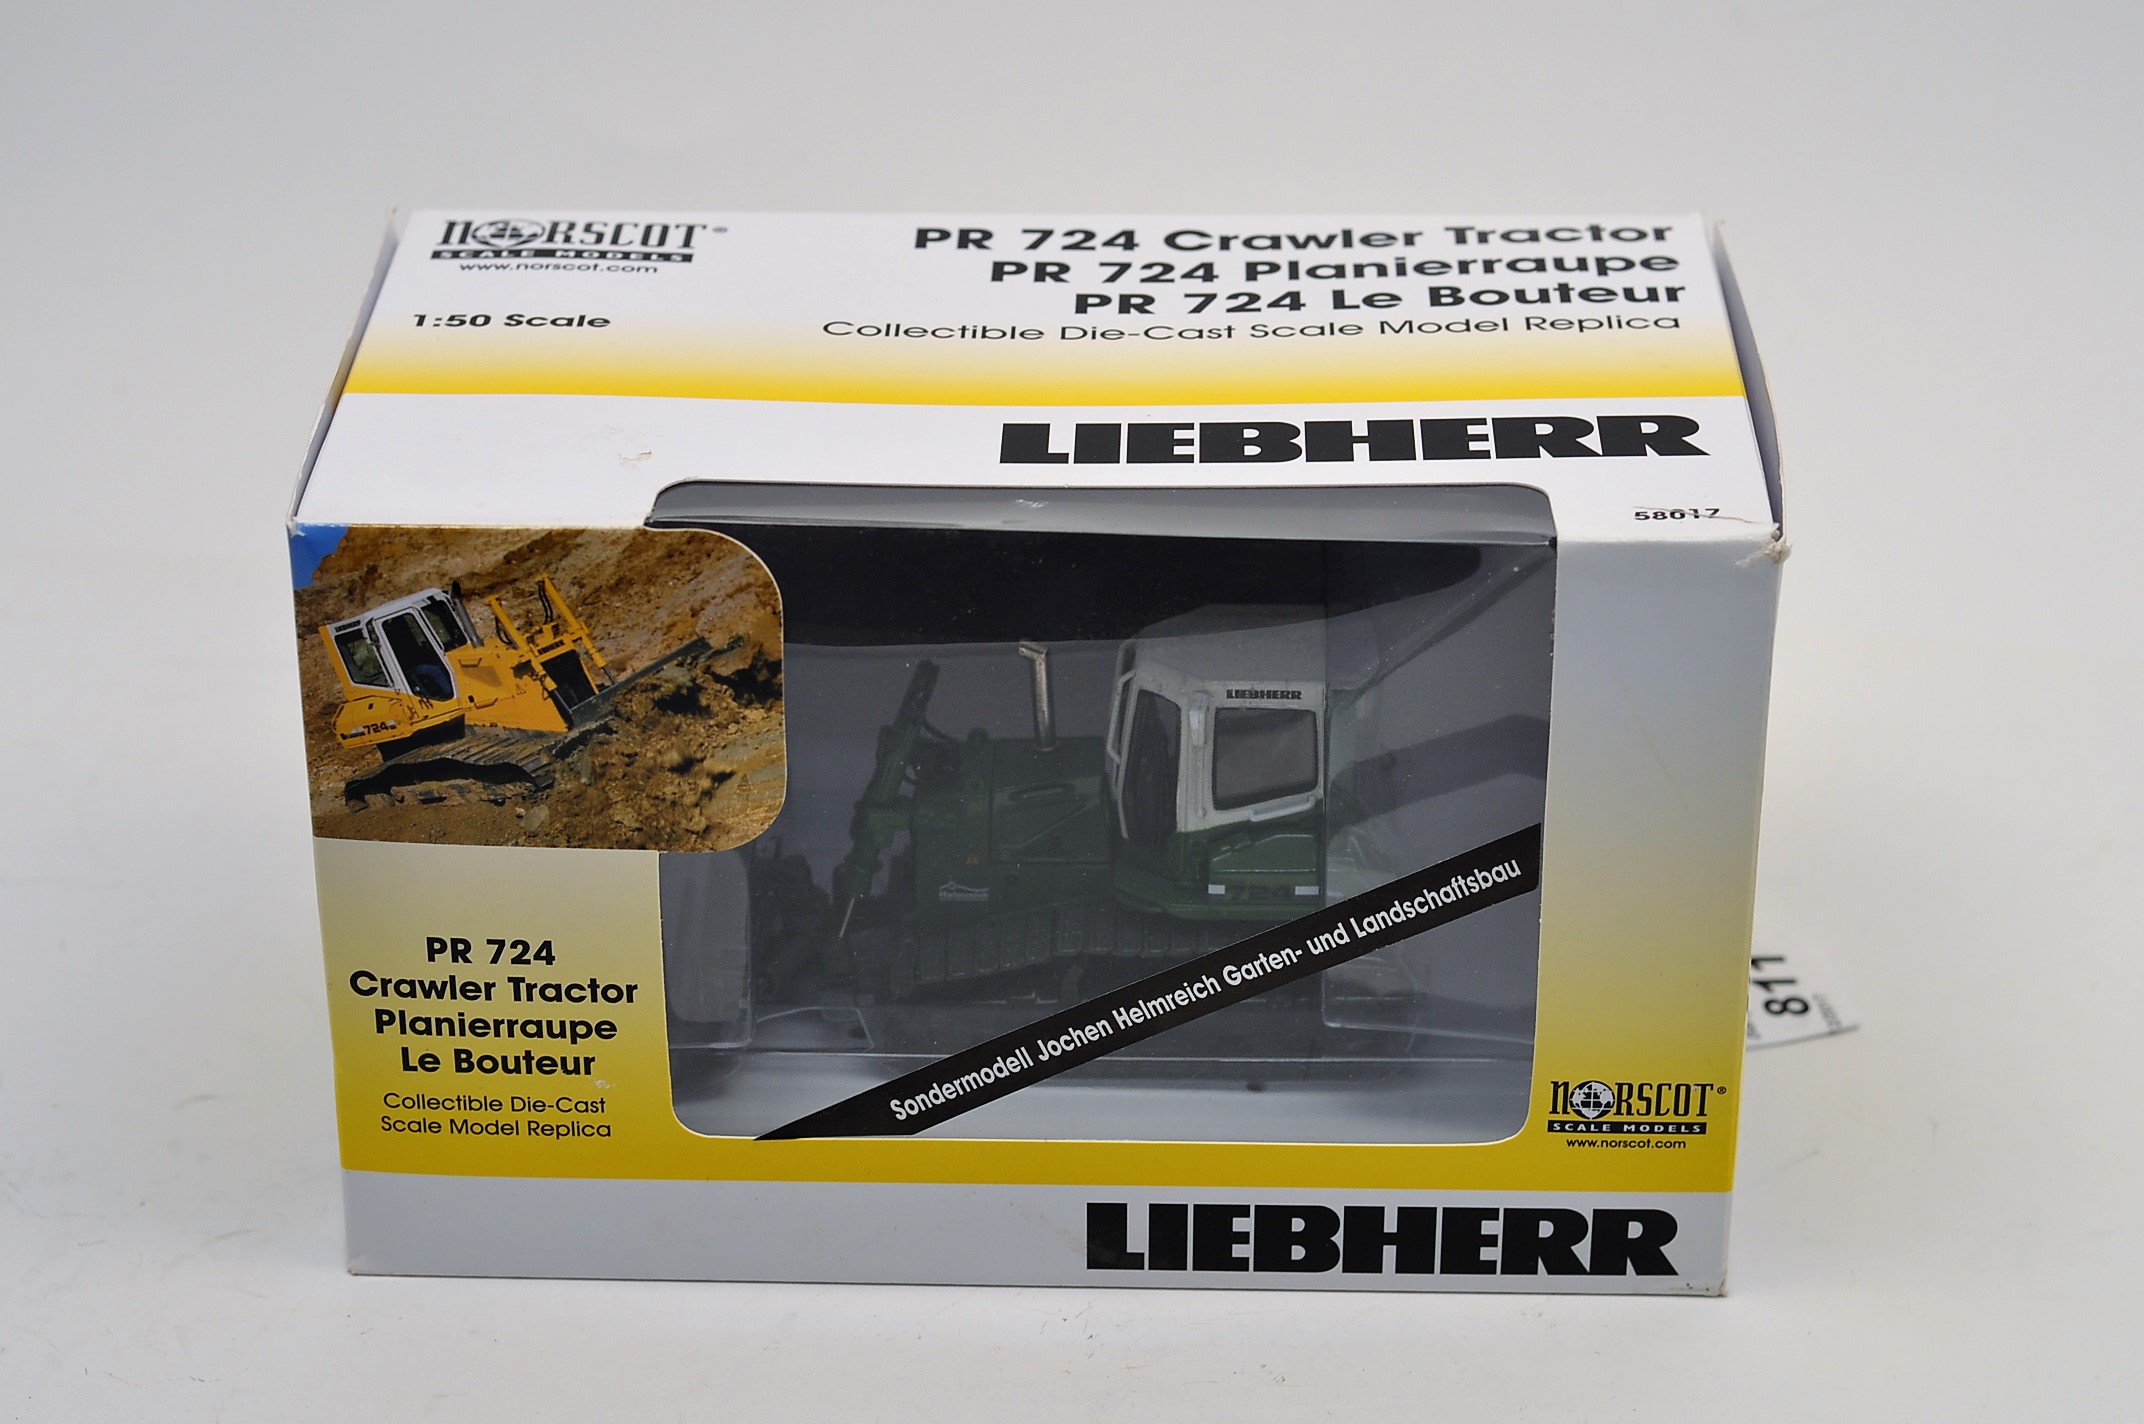 LIEBHERR 1:50 SCALE PR 724 CRAWLER TRACTOR NORSCOT SALE MODELS WITH BOX